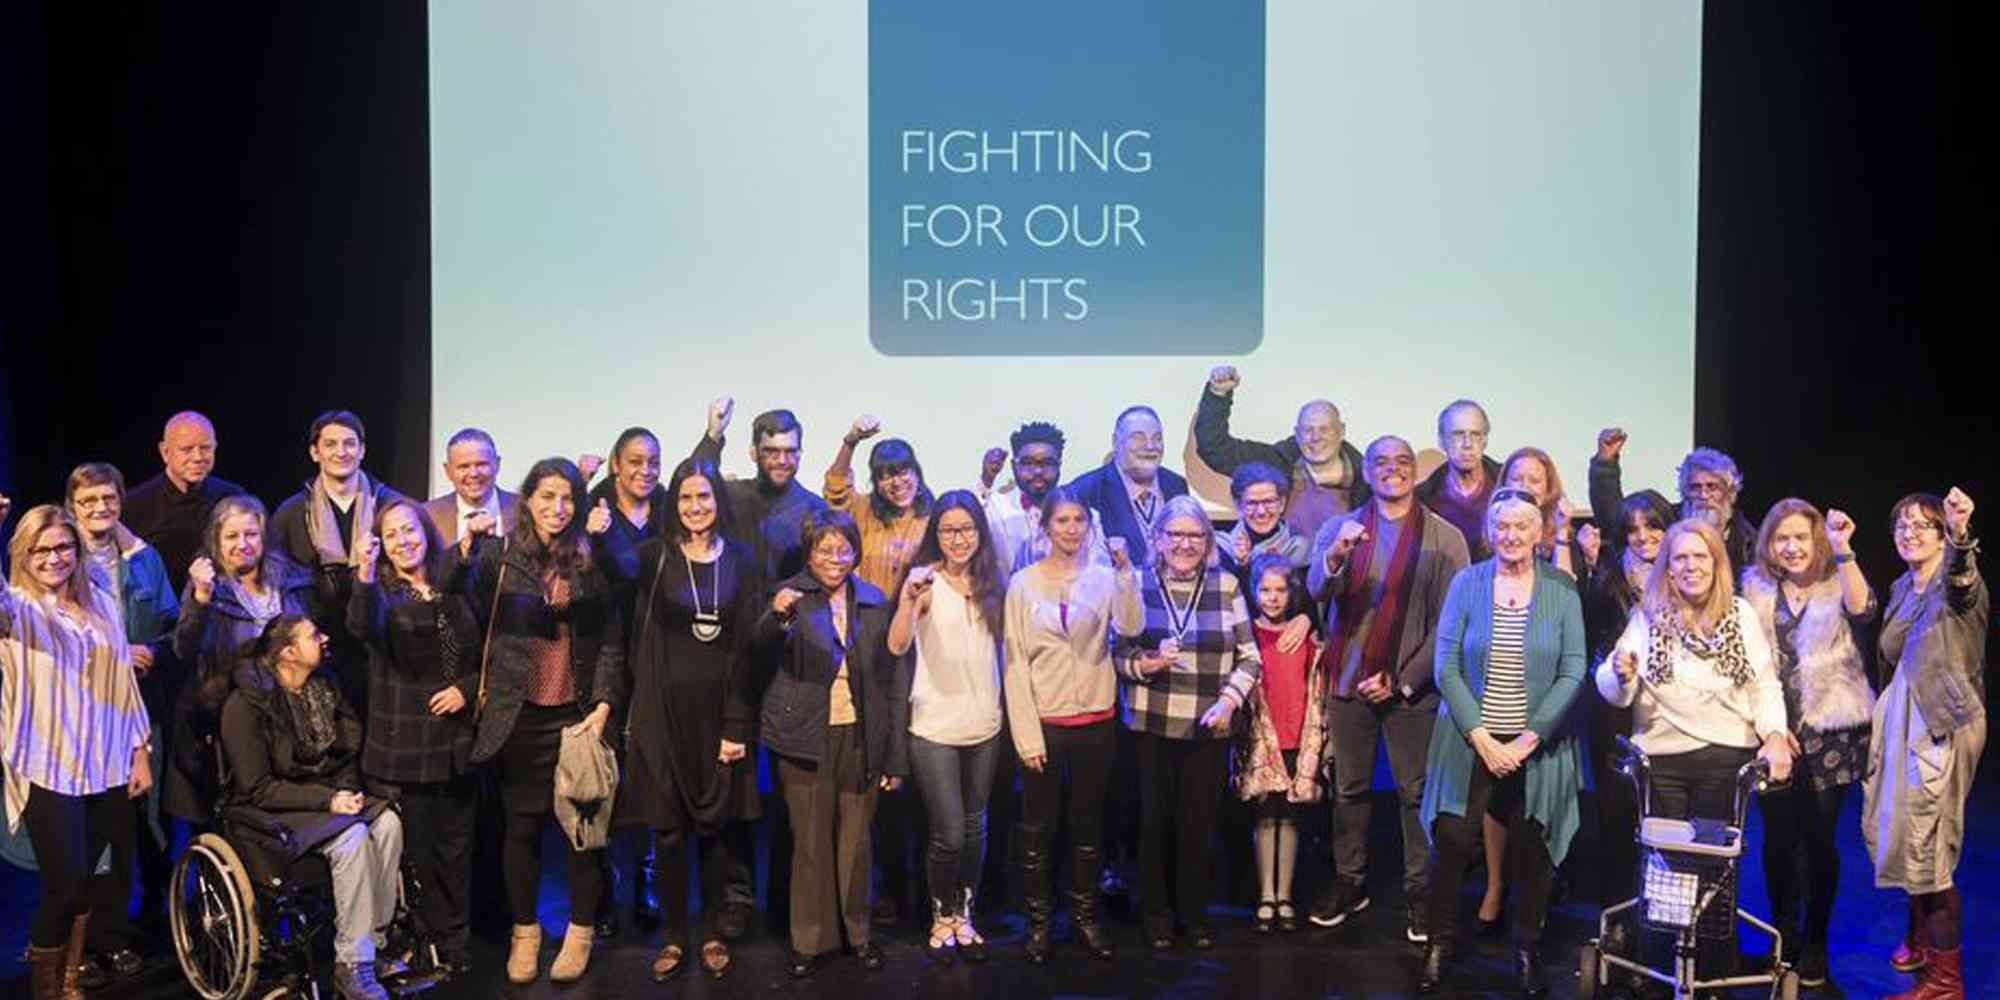 Fighting for our rights end of project celebration (2018) - KCIL, h2h, SIG on Inclusion and Social Justice, schools of Nursing and Education, StoryAID, Orchard Trust with the community